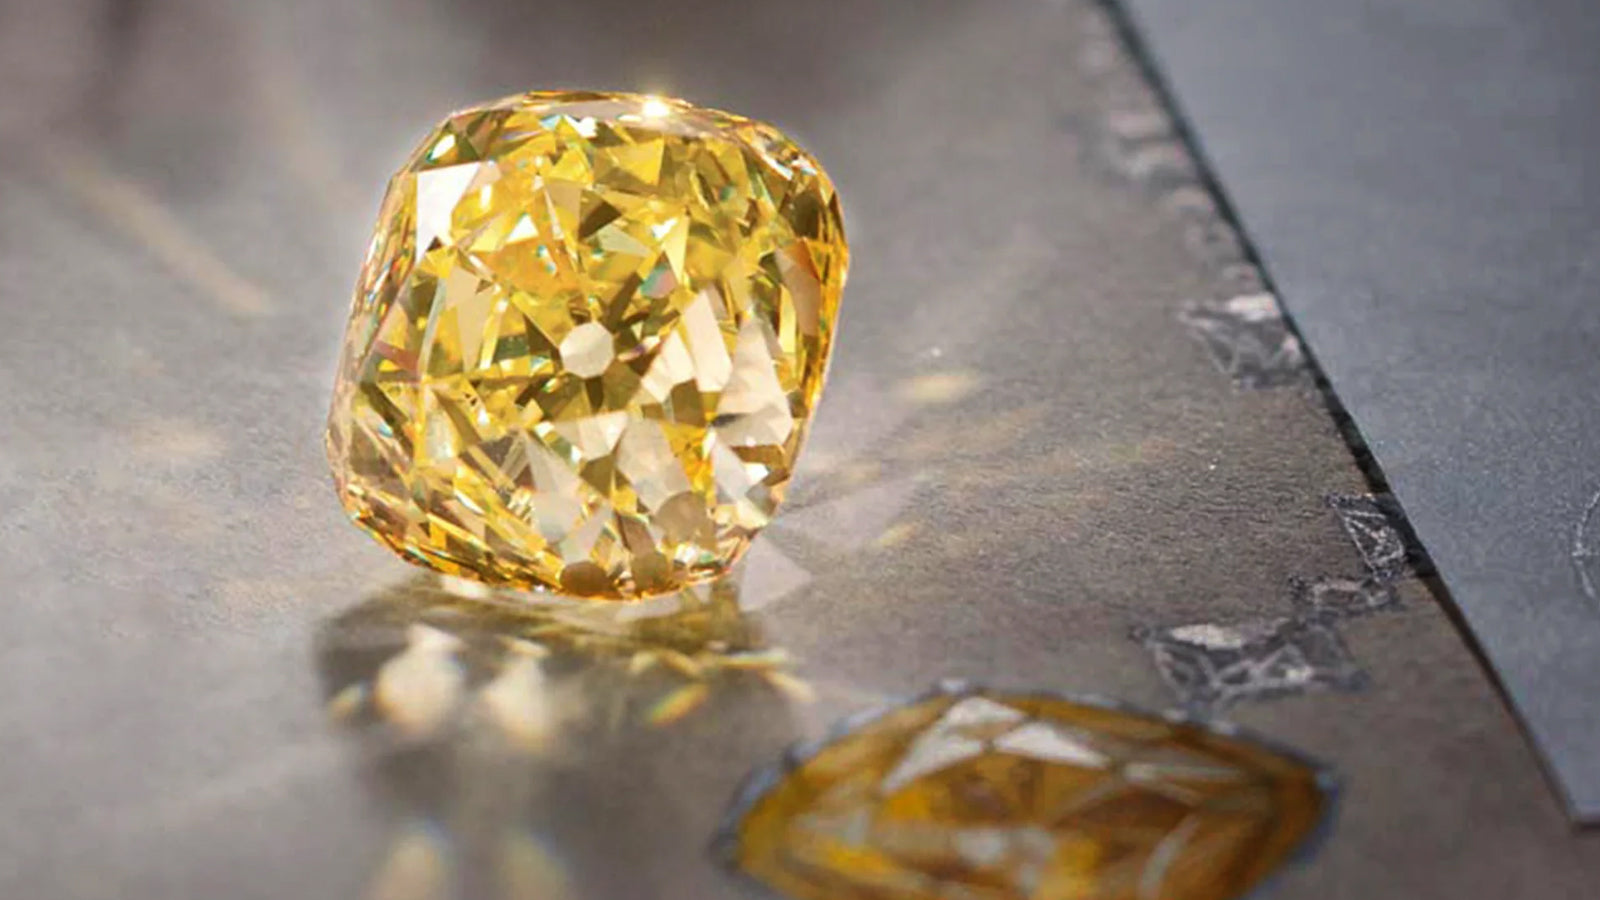 10 FACTS ABOUT FANCY YELLOW COLOUR DIAMONDS YOU DIDN’T KNOW - SHIMANSKY.CO.ZA